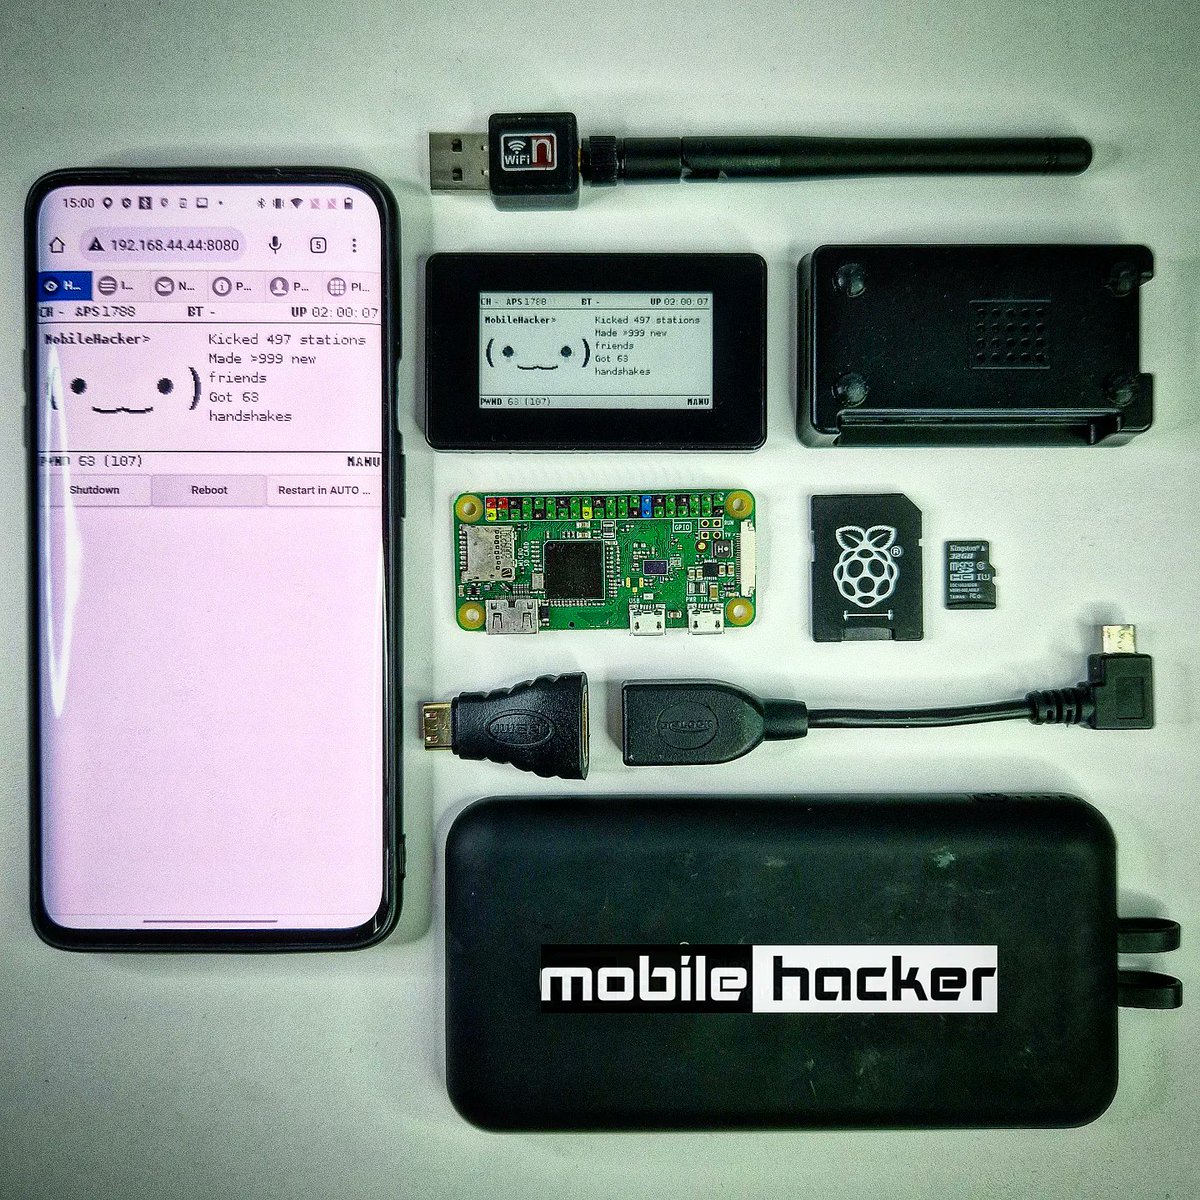 Pwnagotchi Arsenal 📲
The pwnagotchi is connected via Bluetooth and controlled using Android smartphone
✅️ Disassembled pwnagotchi: Raspberry Pi Zero WH, OTG cable, HDMI to mini HDMI, Waveshare v2 display, micro SD card, external battery,external wifi adapter and OnePlus 7T Pro